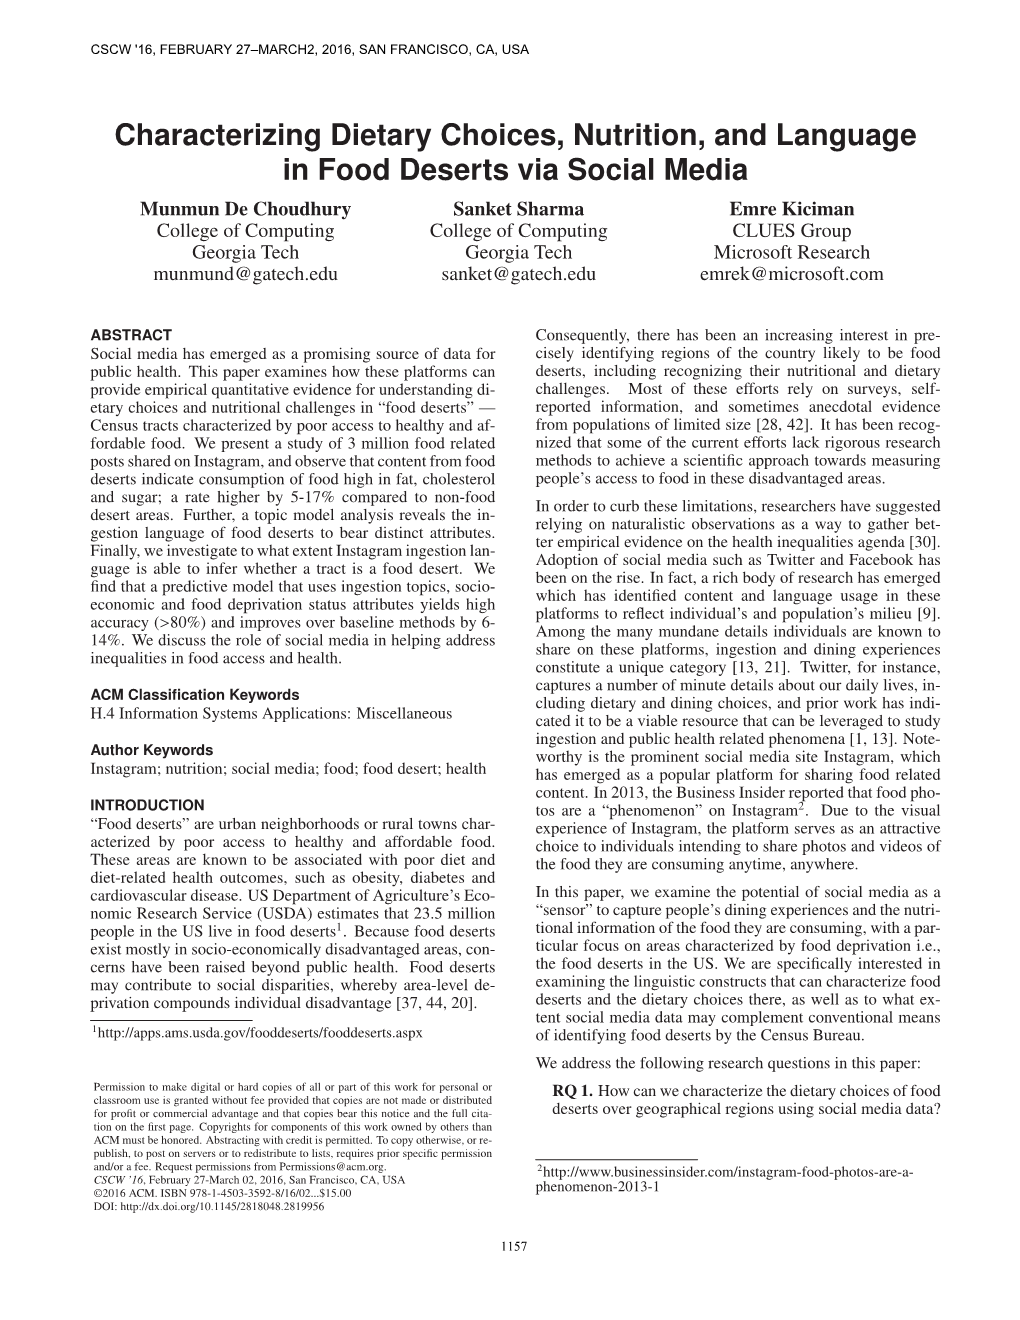 Characterizing Dietary Choices, Nutrition, and Language in Food